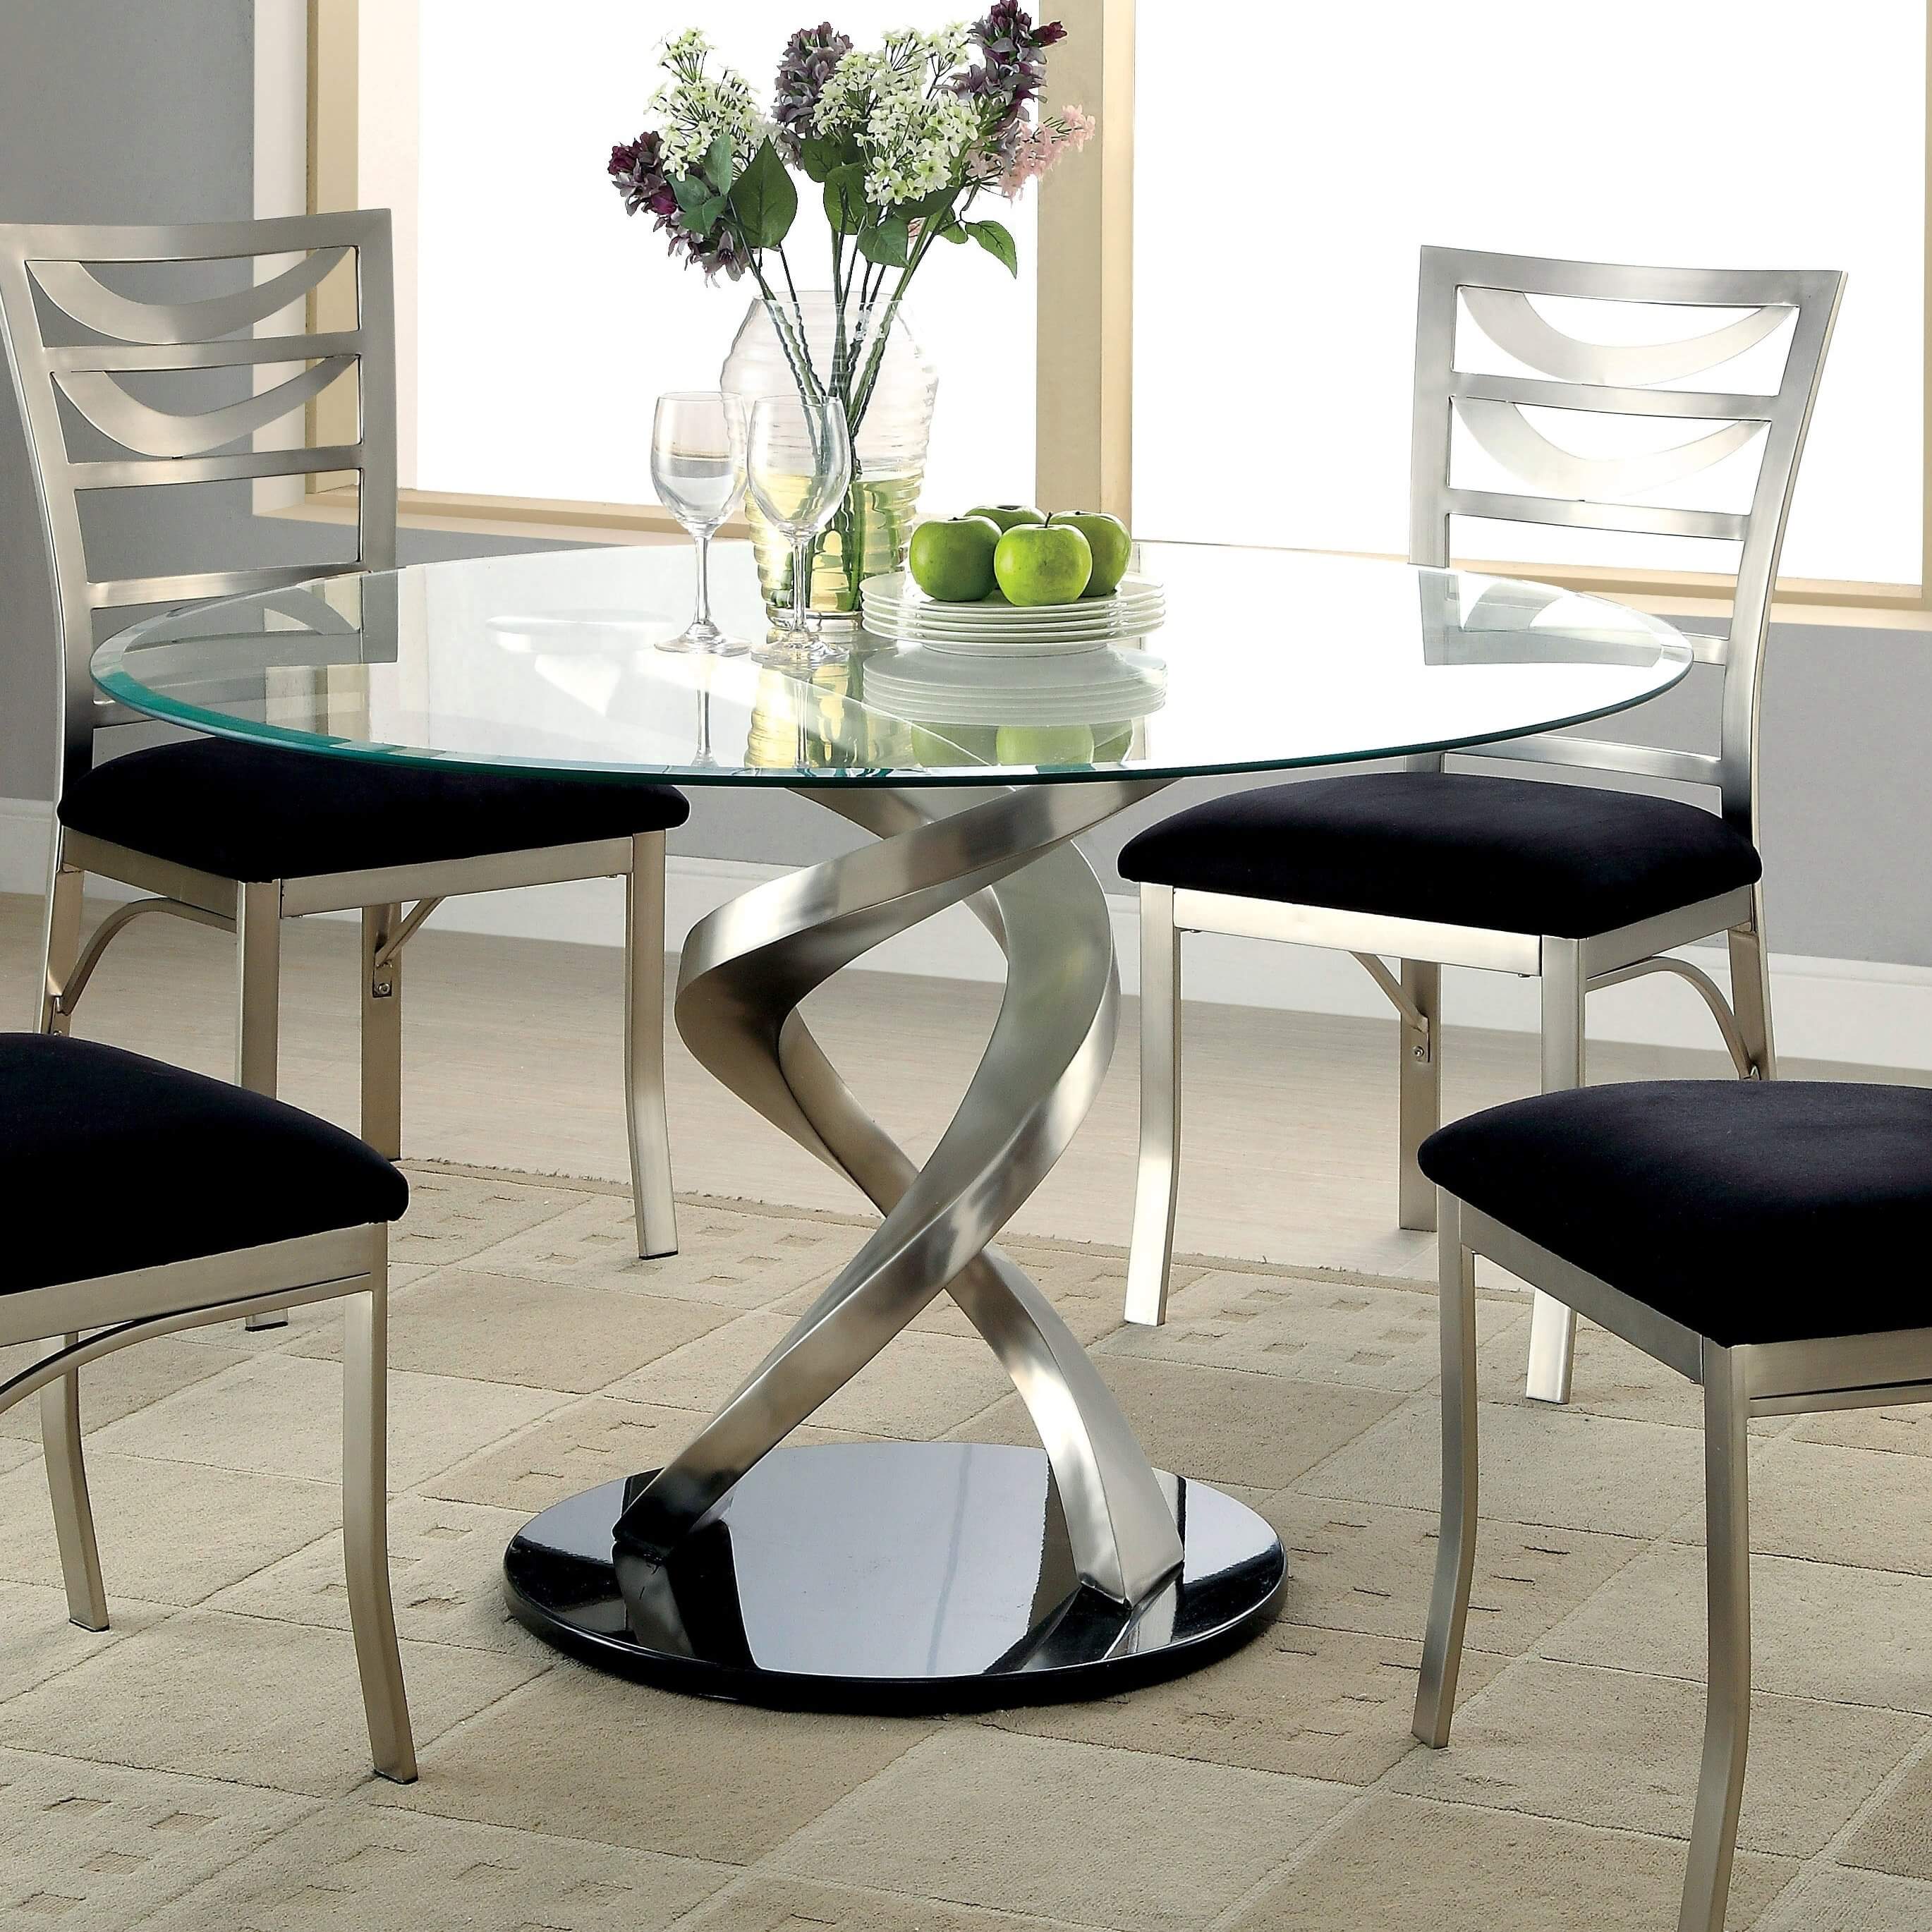 A glass dining table with a metal base
